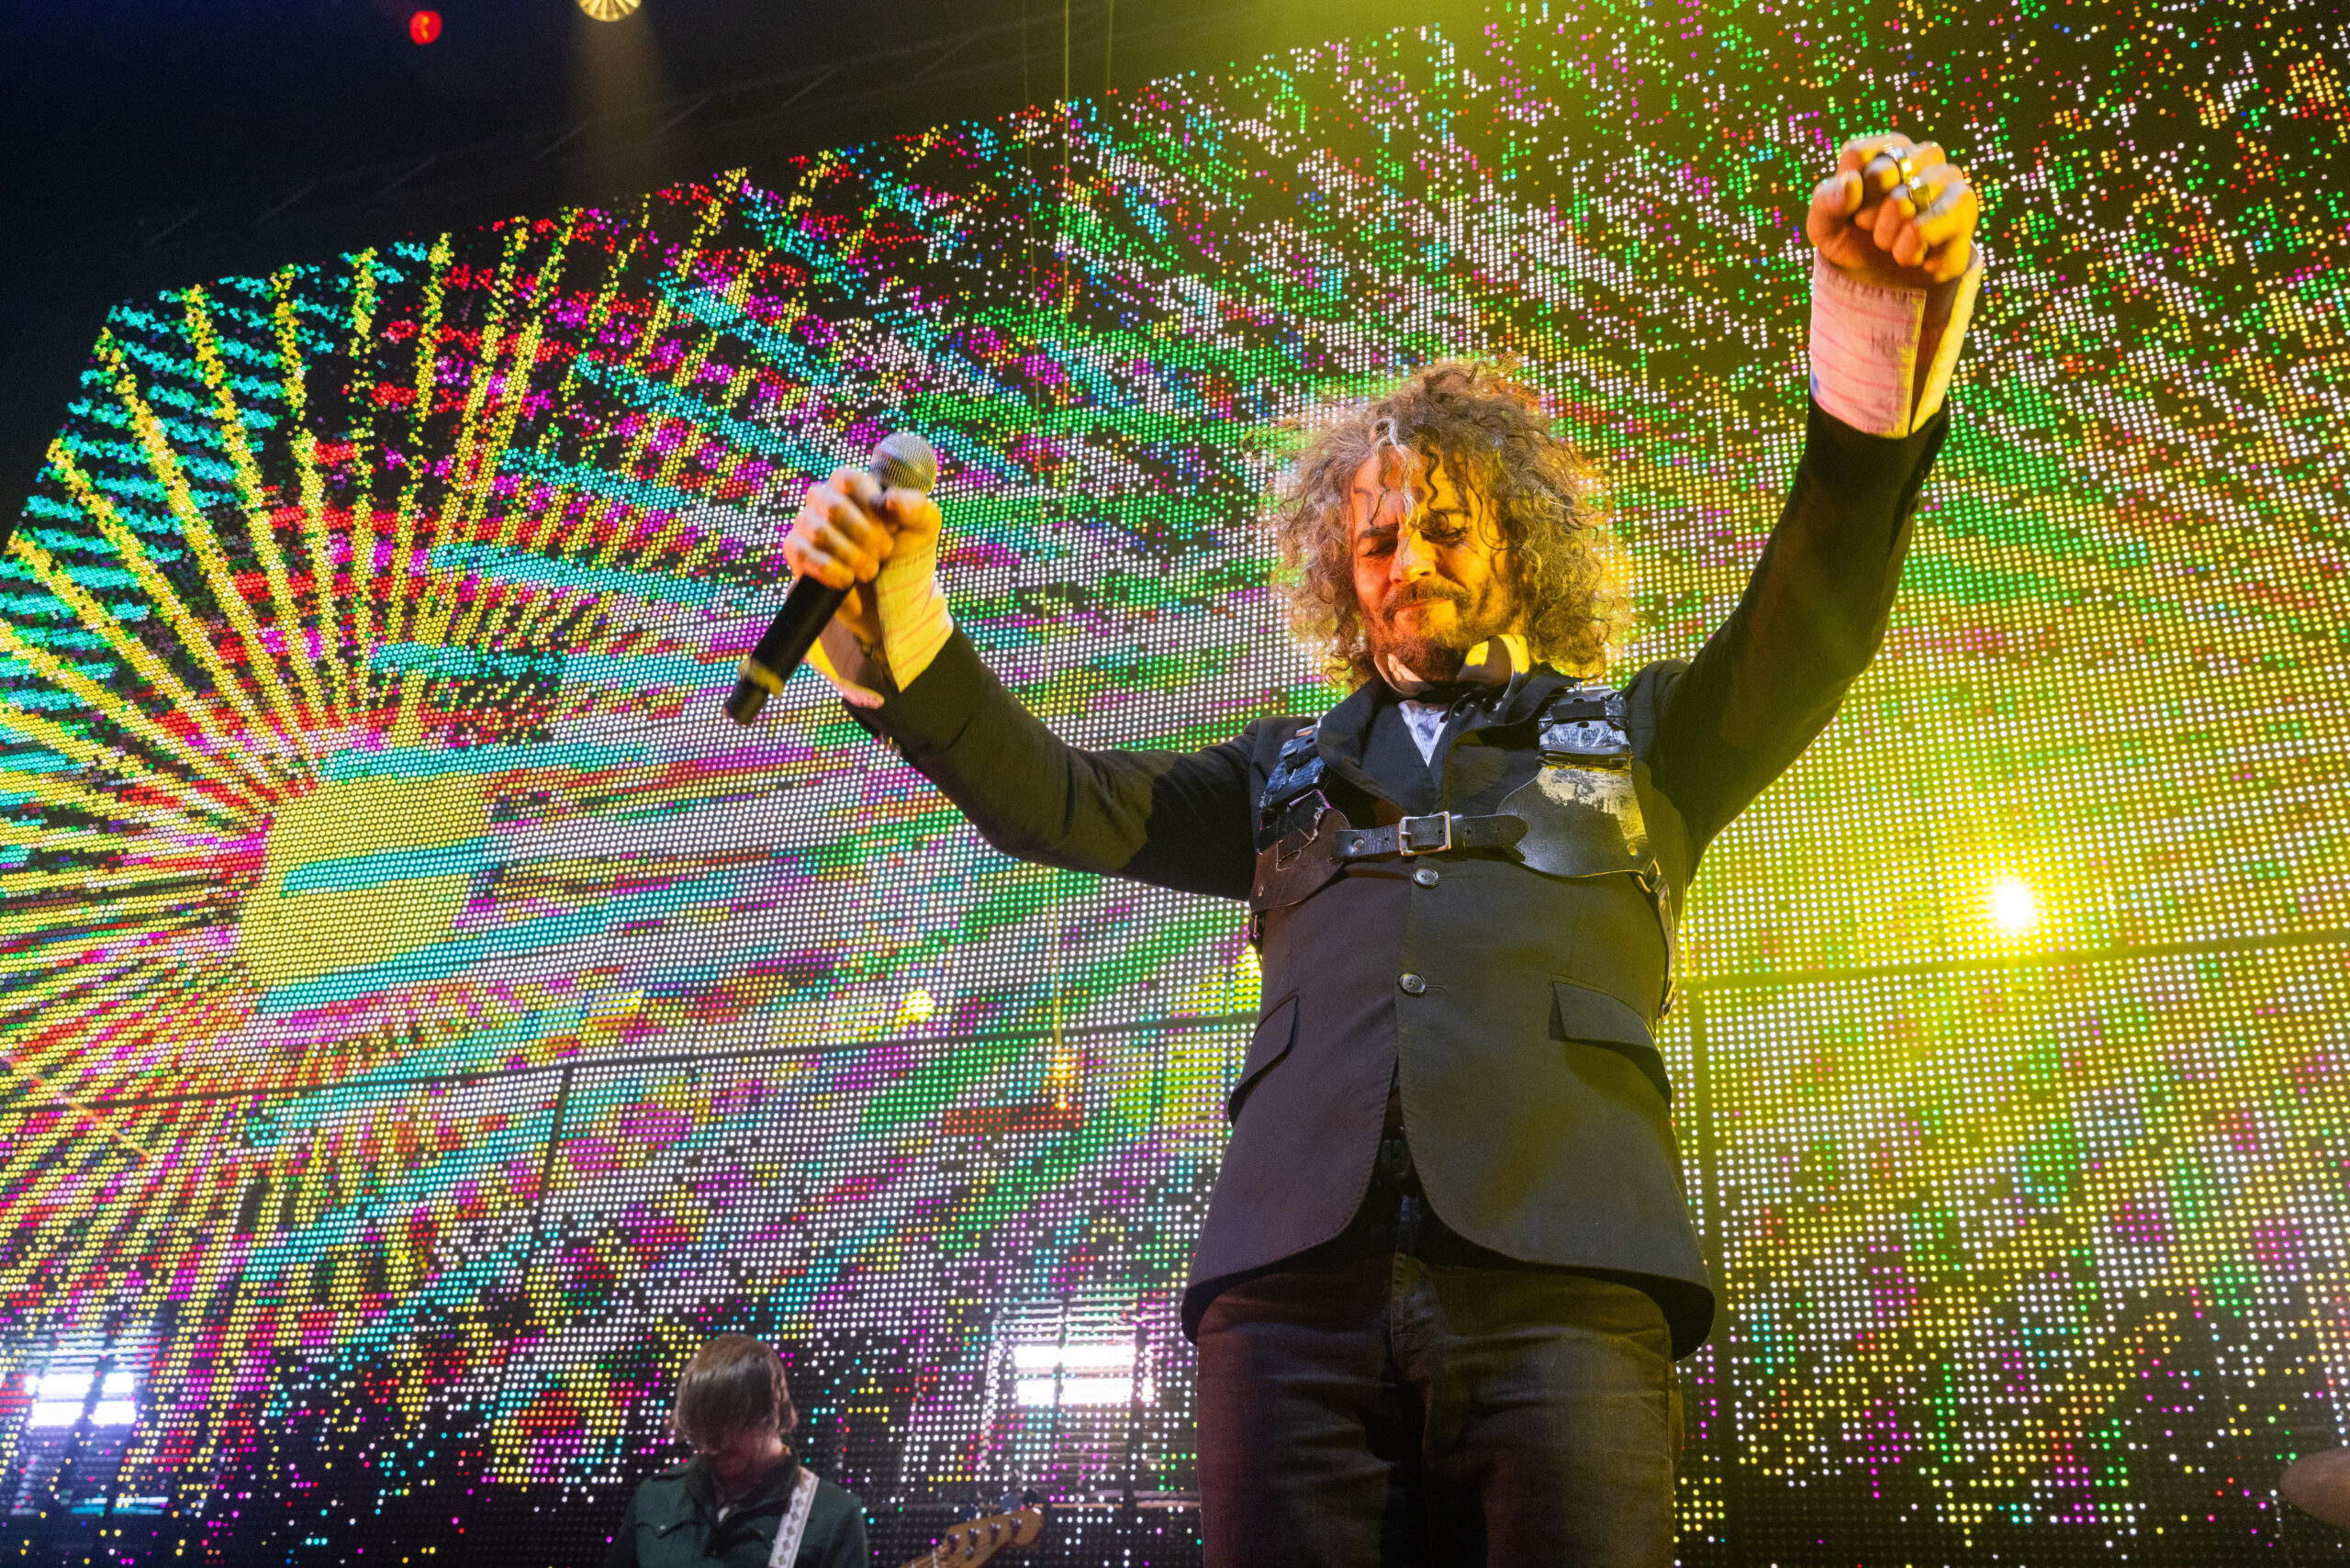 The Flaming Lips live